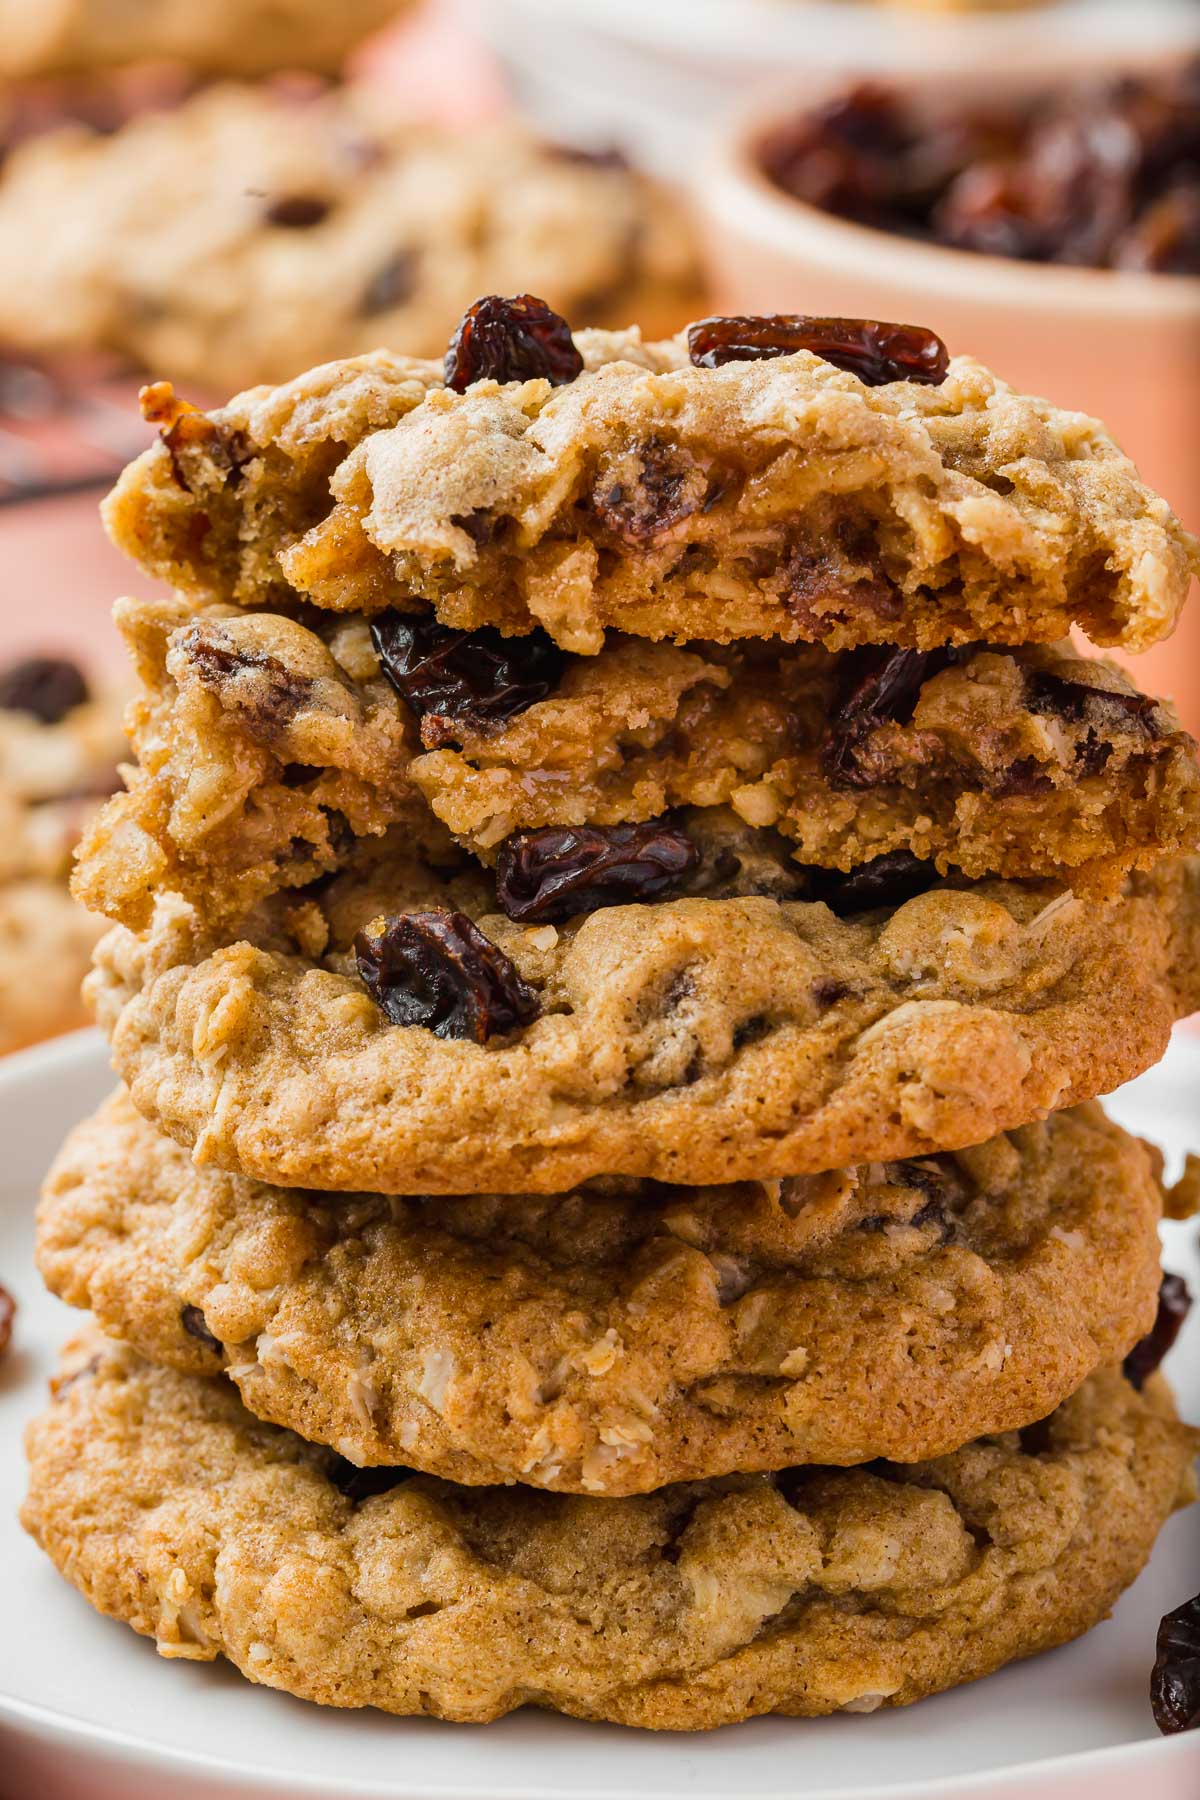 A stack of gluten free oatmeal raisin cookies with the top two being broken in half to see the interior.